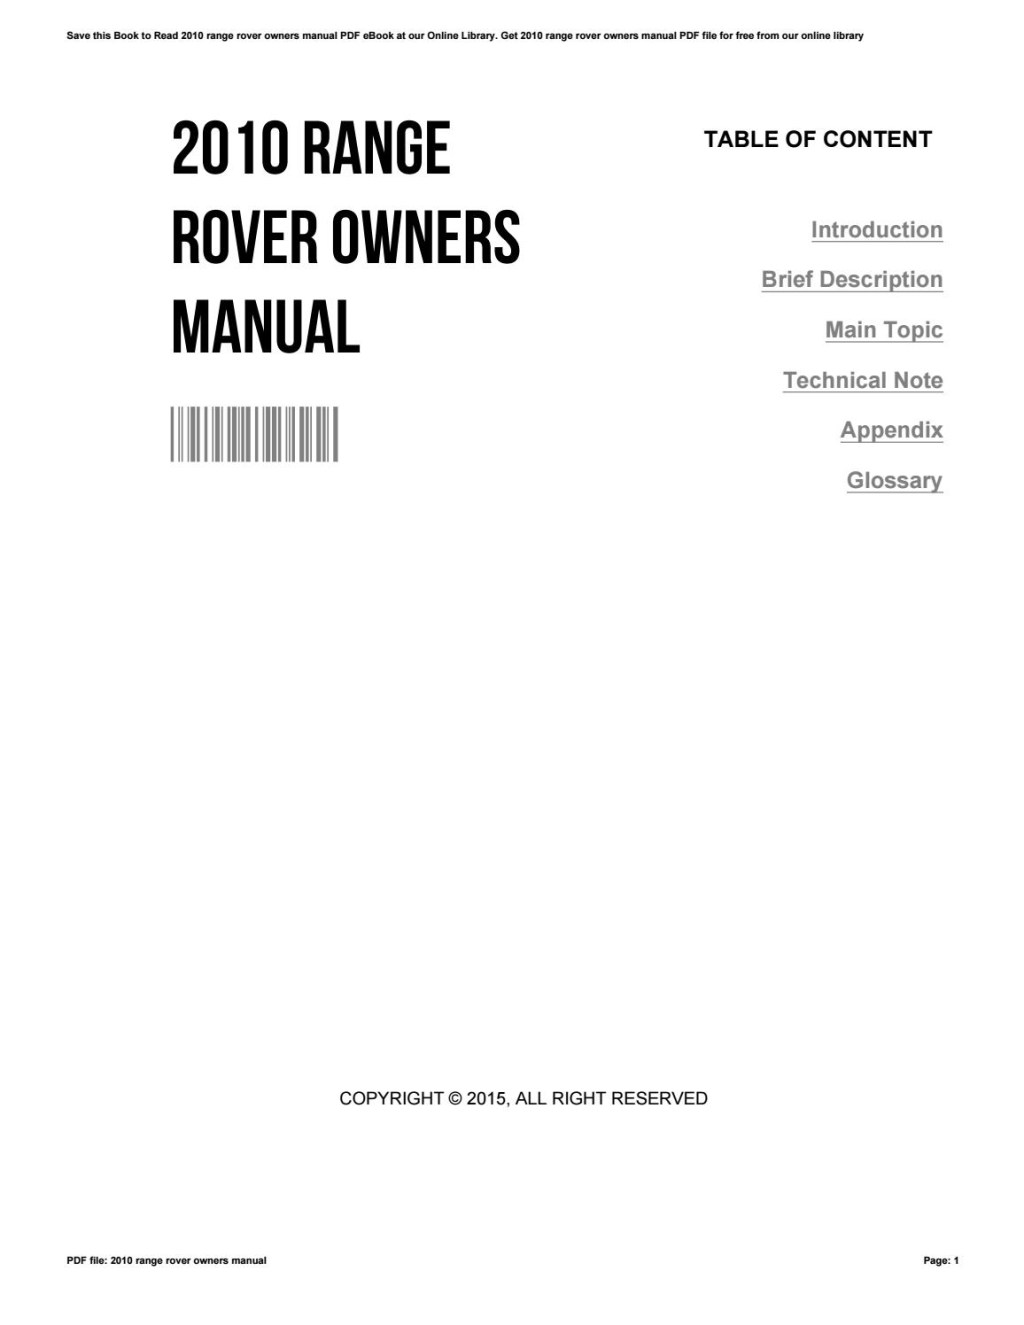 Picture of: range rover owners manual by rblx – Issuu